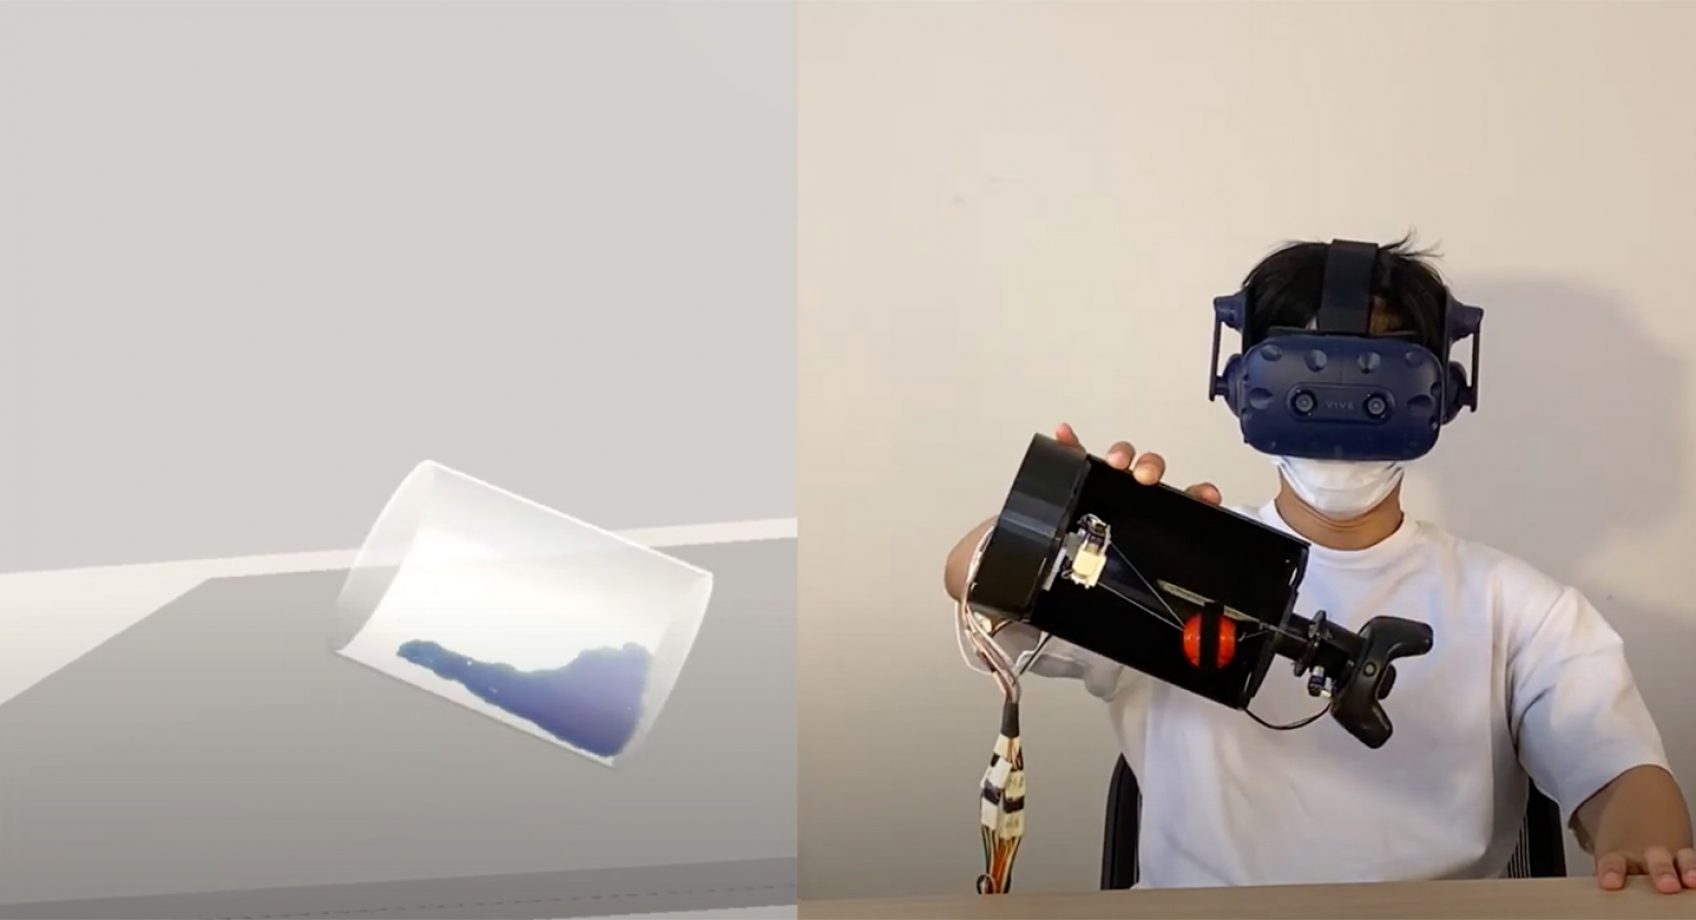 UW ECE alumnus Frank Liu leads development of device that enables users to experience liquids in virtual reality Banner